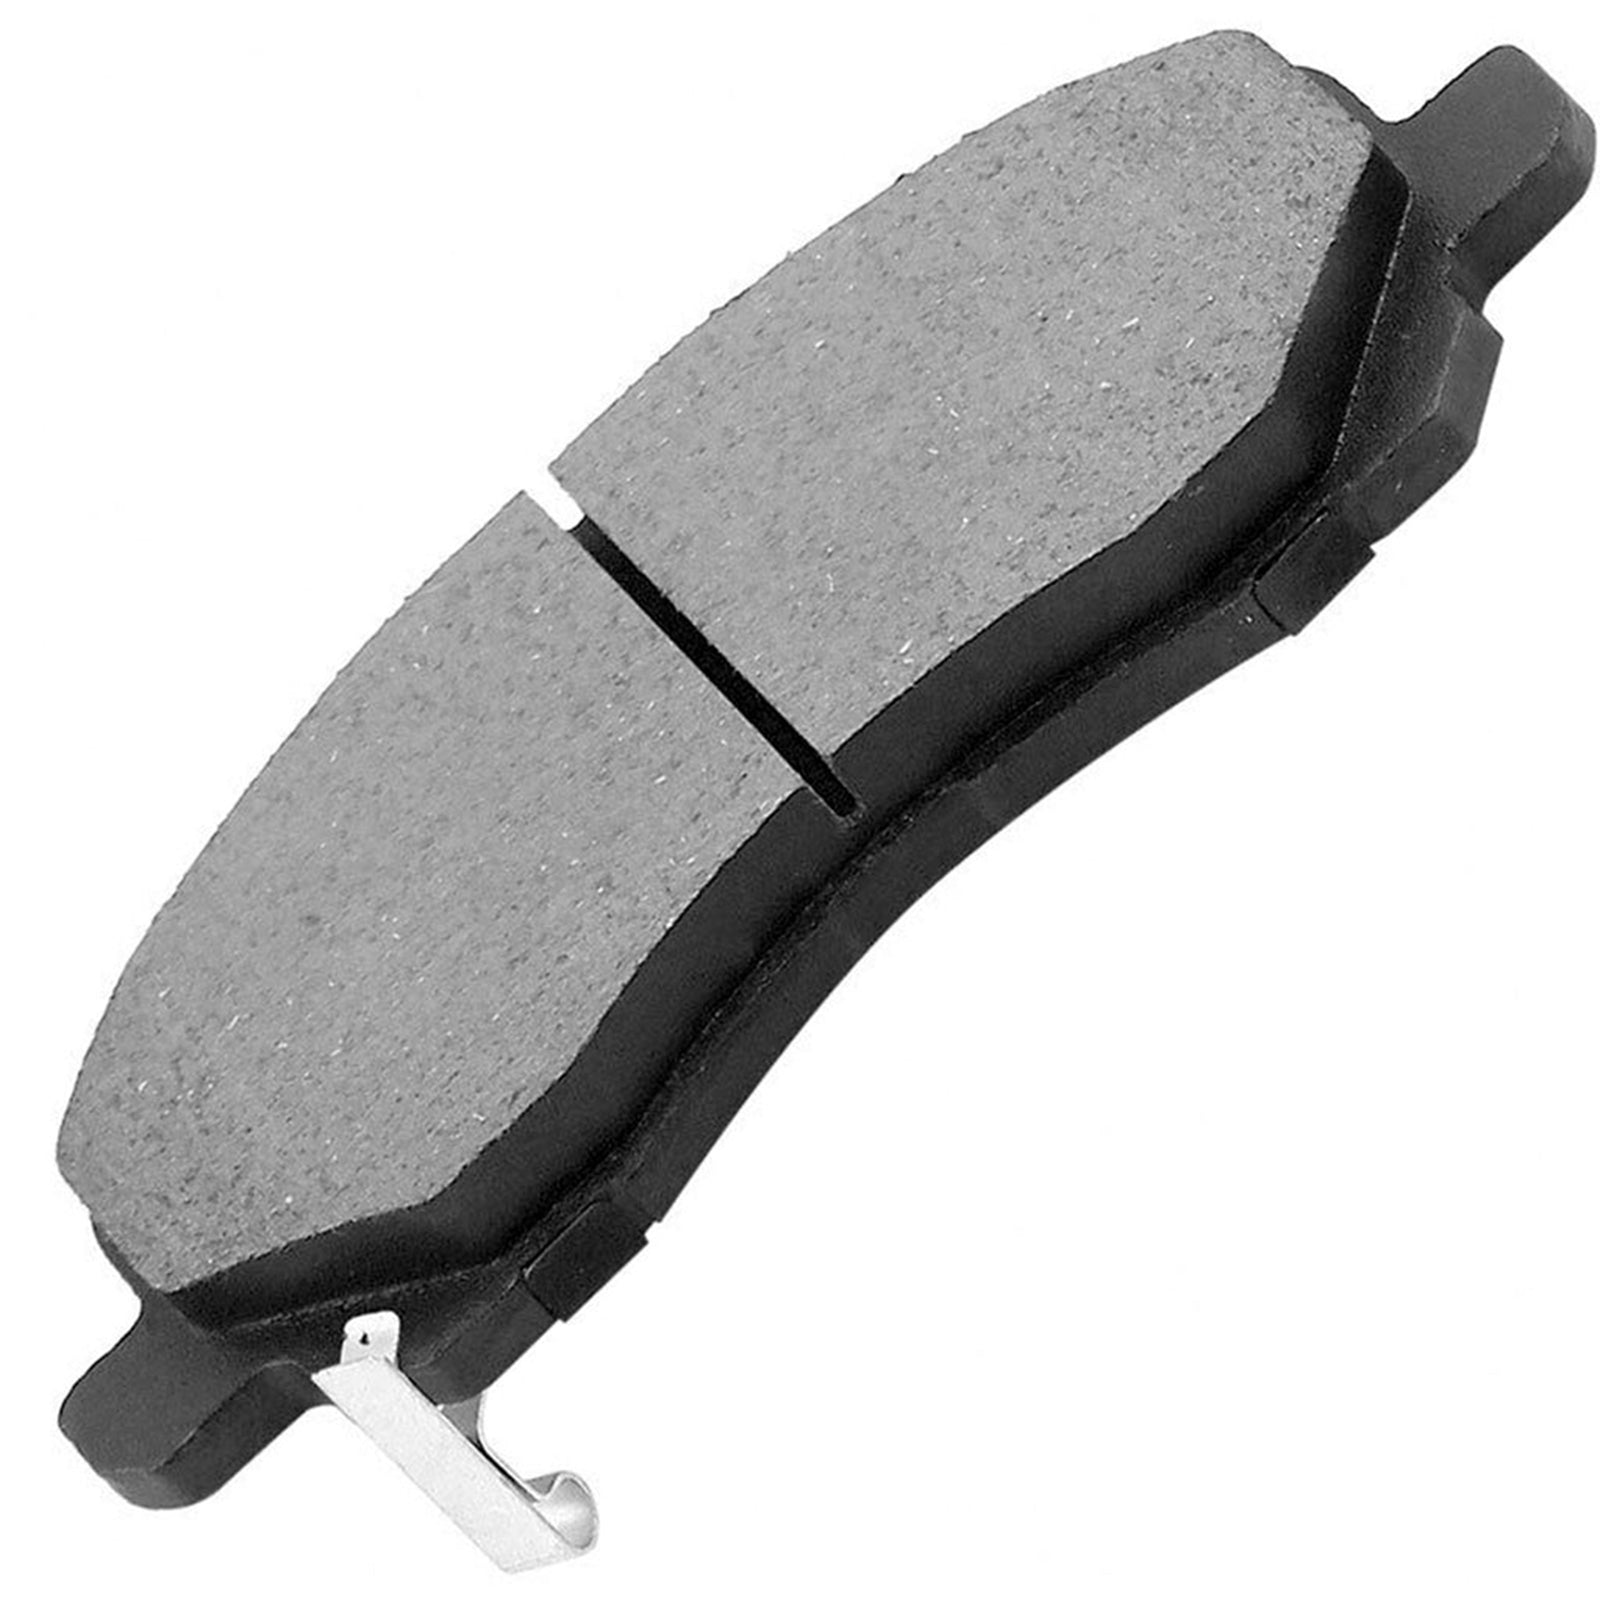 JADODE Front Ceramic Brake Pads For 2011-2015 Chevrolet Cruze/2012-2017 Chevy Sonic